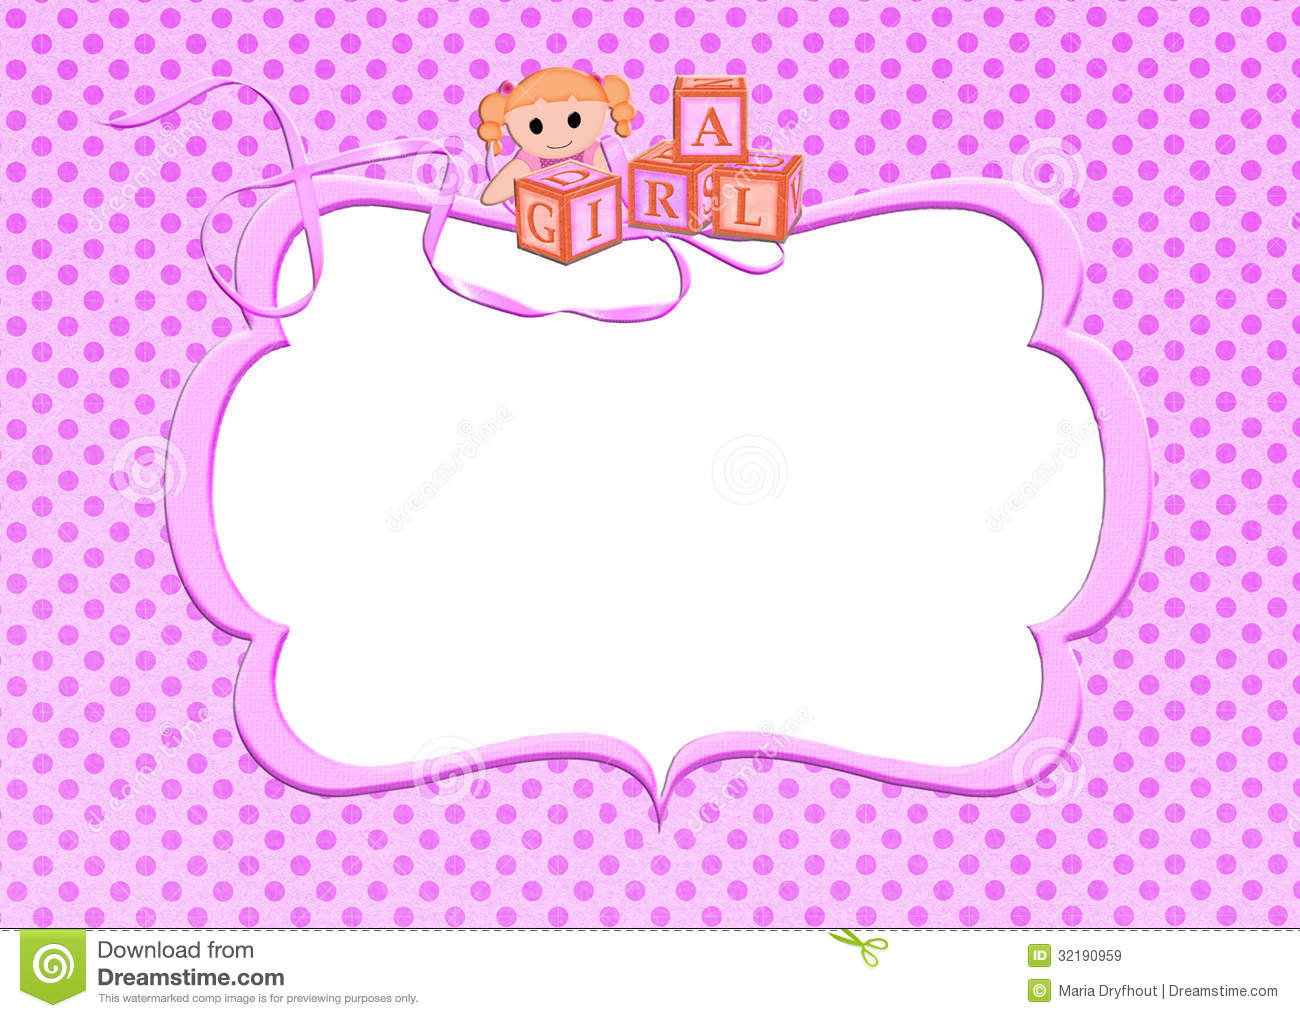 Baby Girl Toys Clipart Pink Baby Girl Frame Royalty Free Stock Images